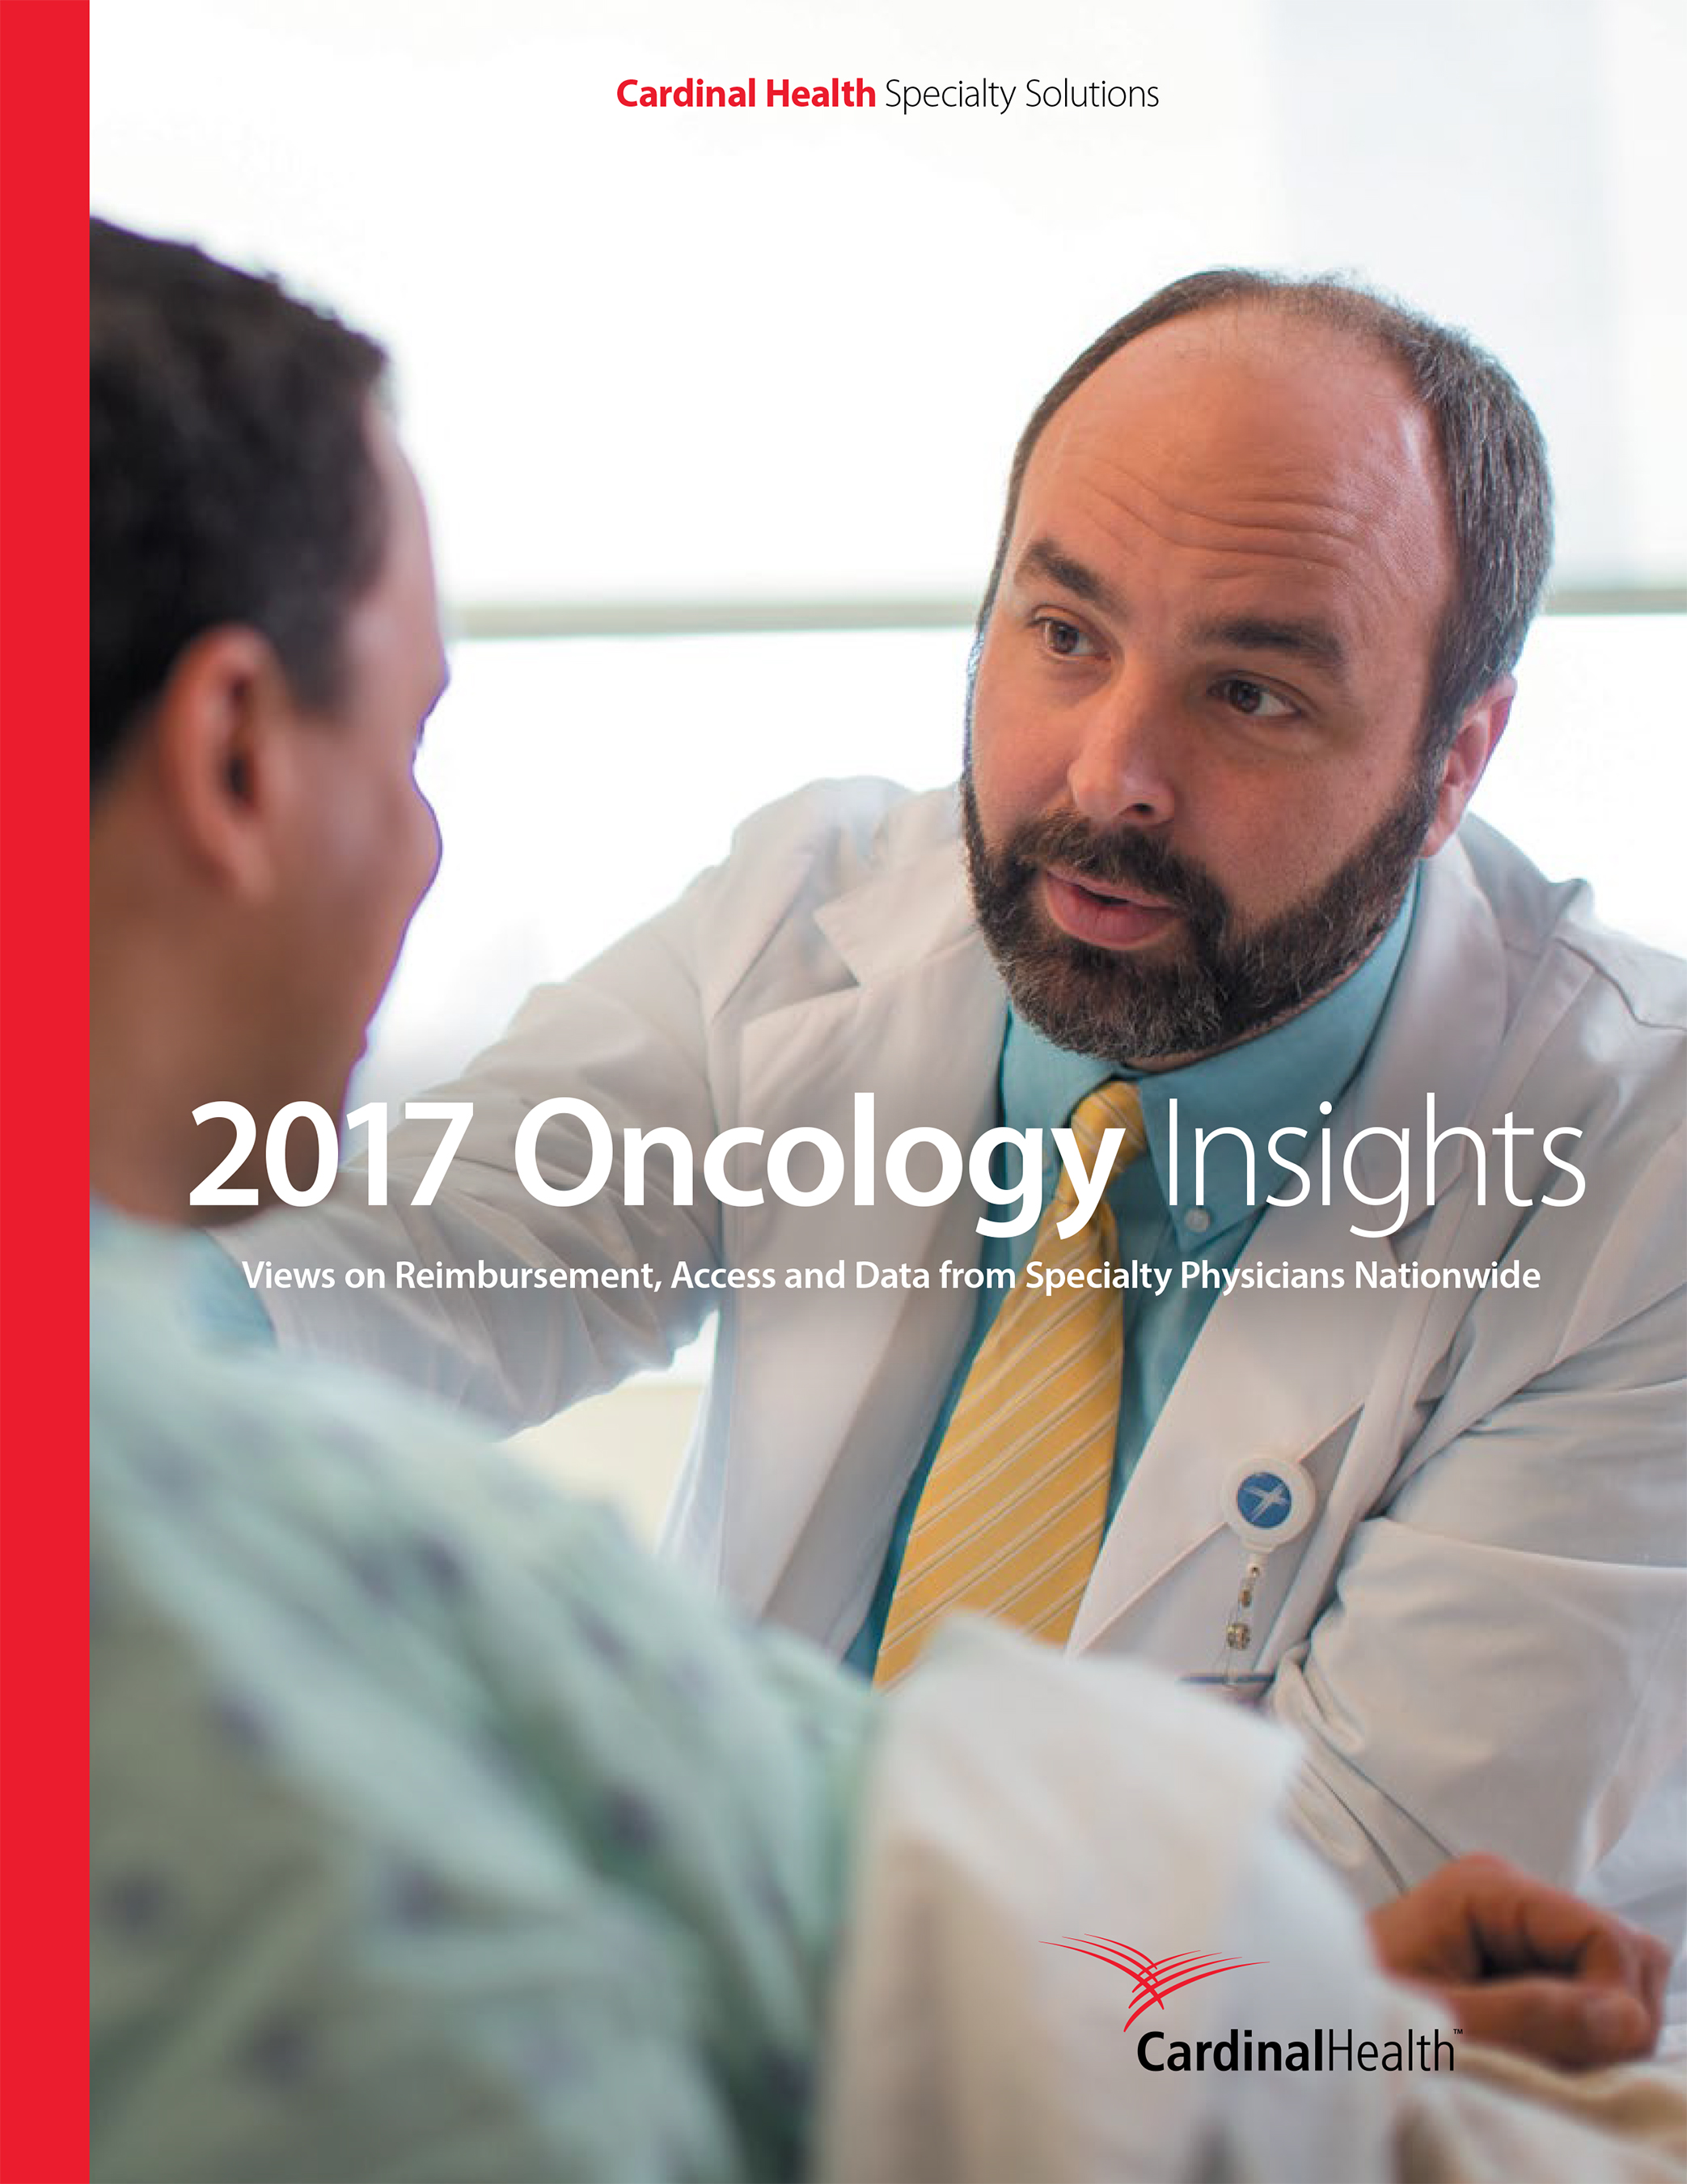 2017 Oncology Insights Report